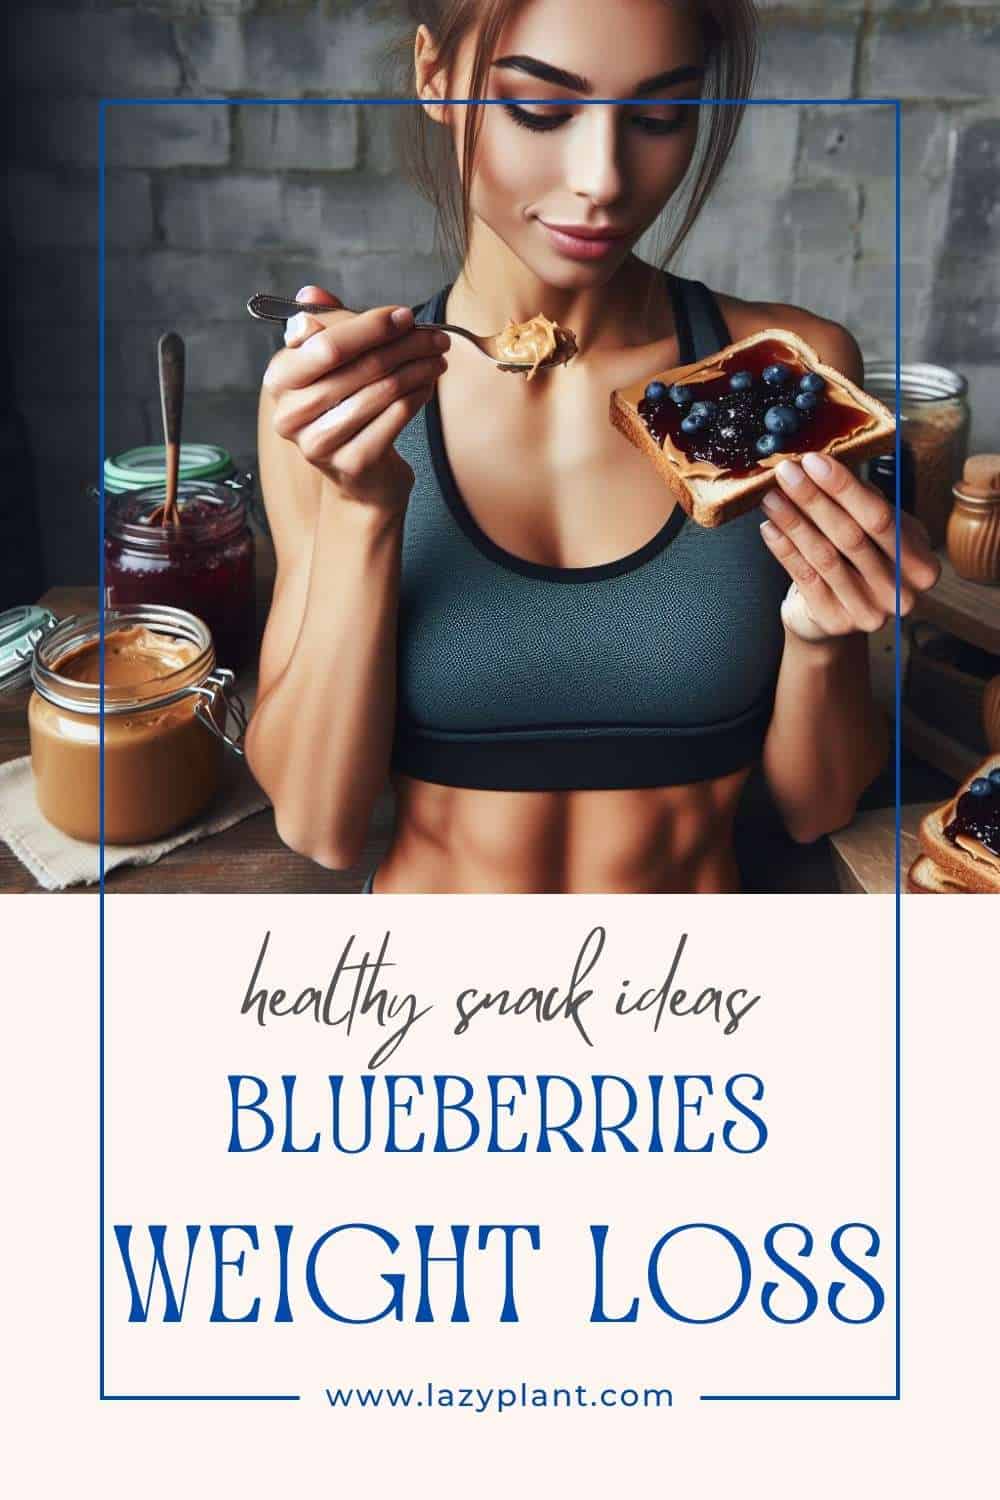 Blueberries: Healthy Snack Ideas for Weight Loss.